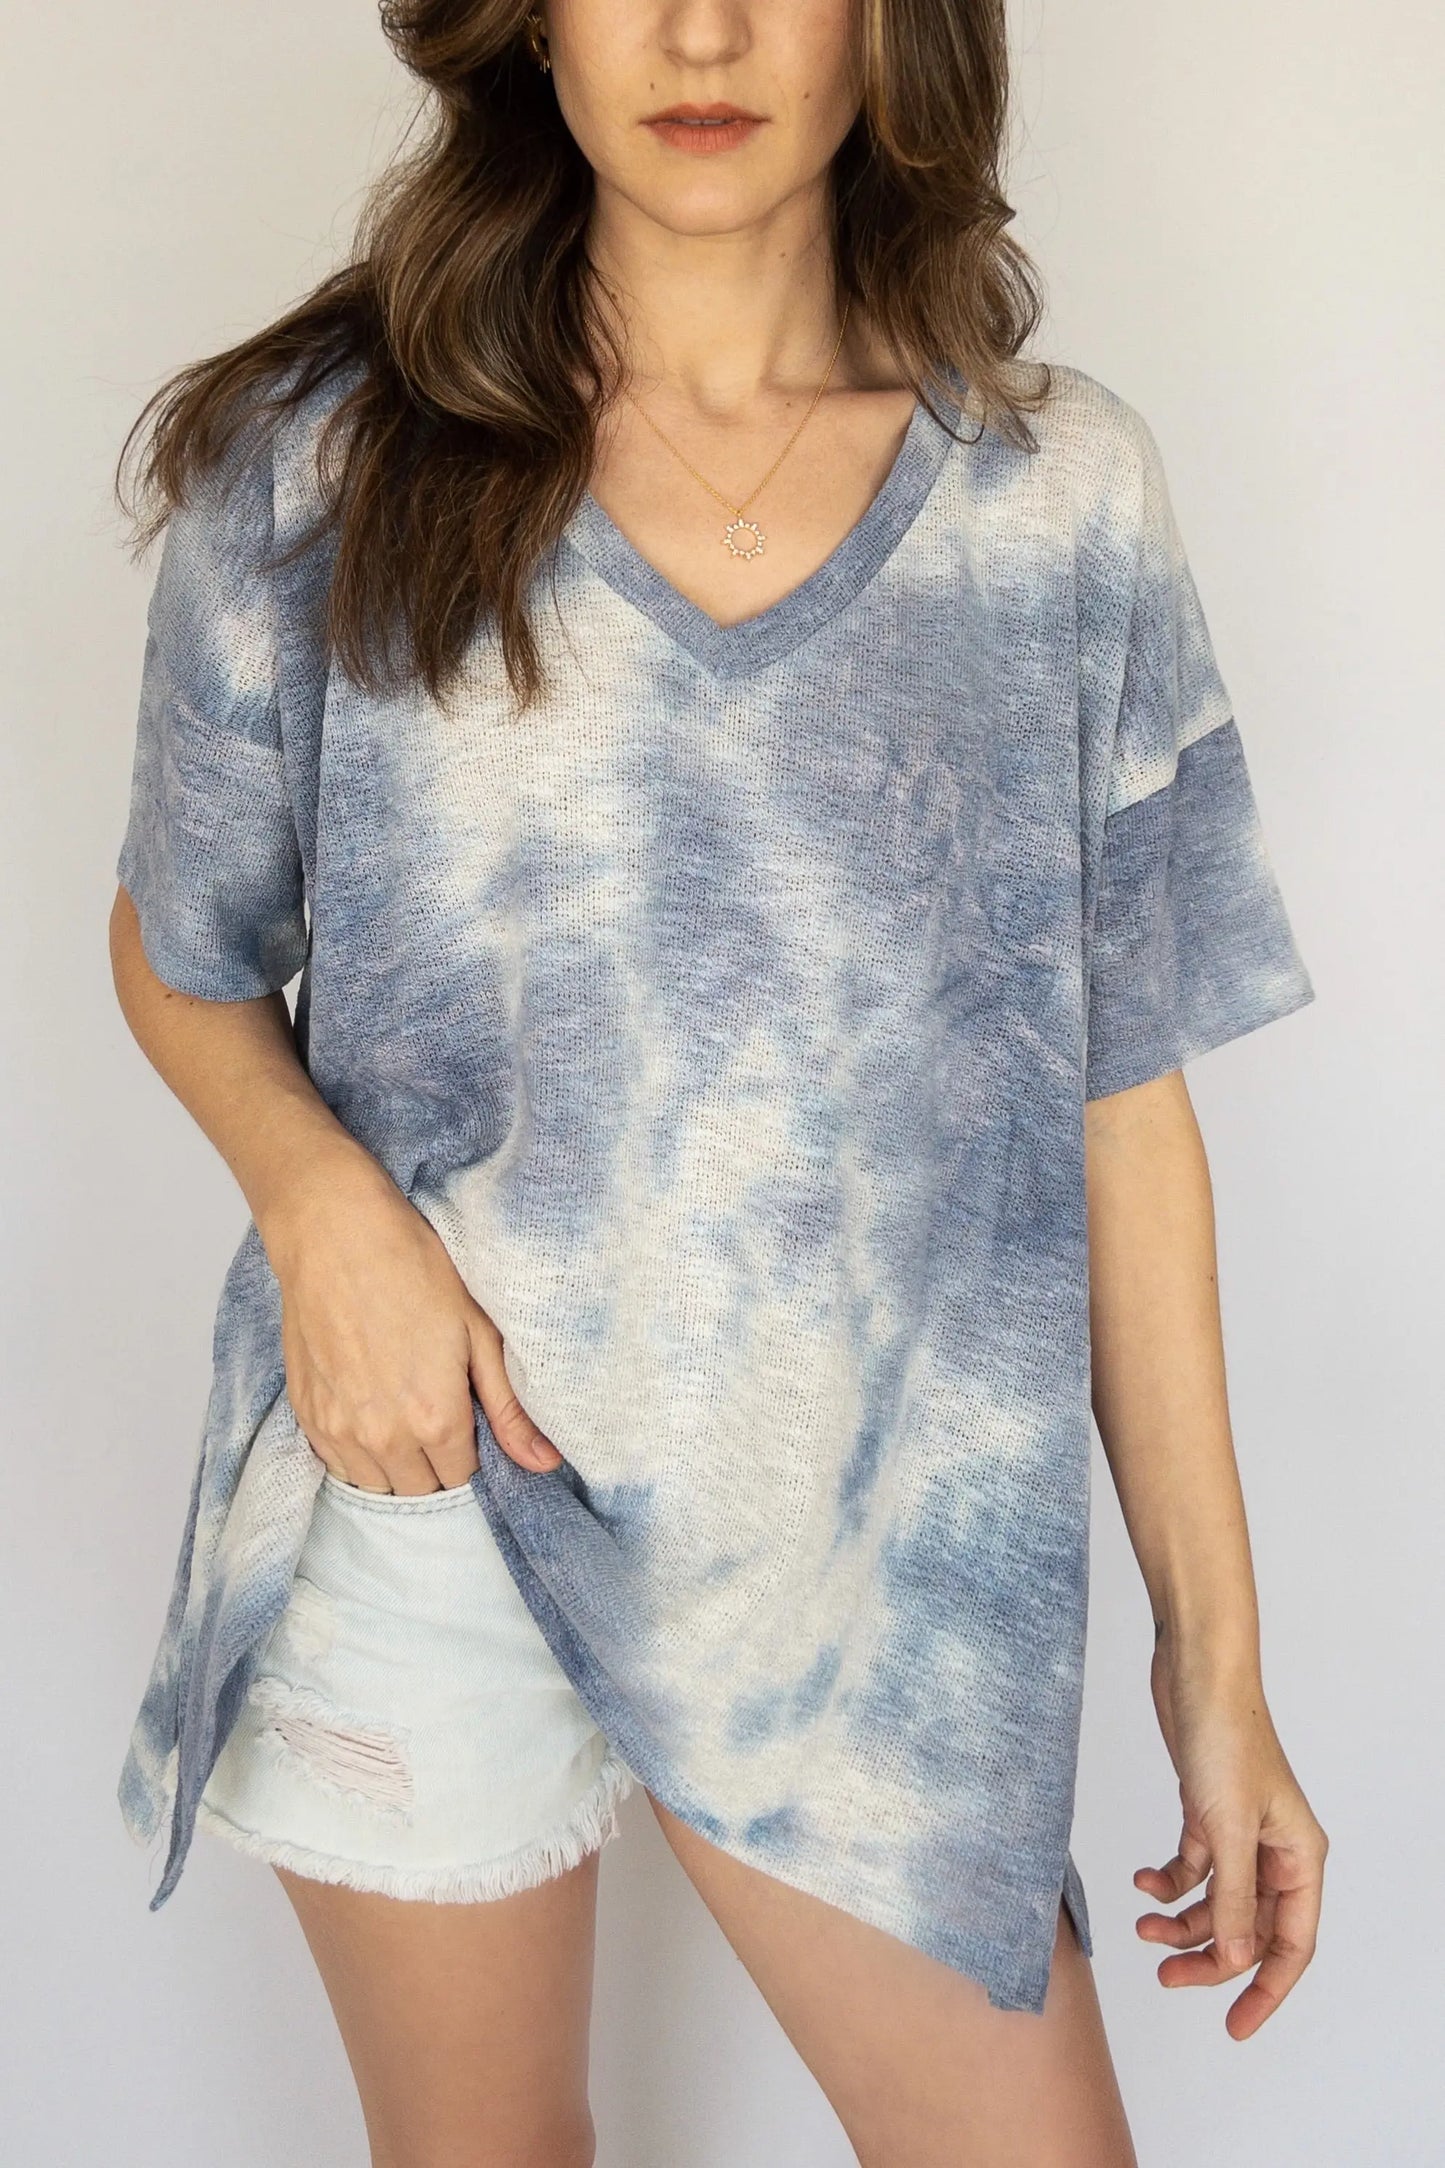 The Tiny Details Short Sleeve Knit Tie-dye Top